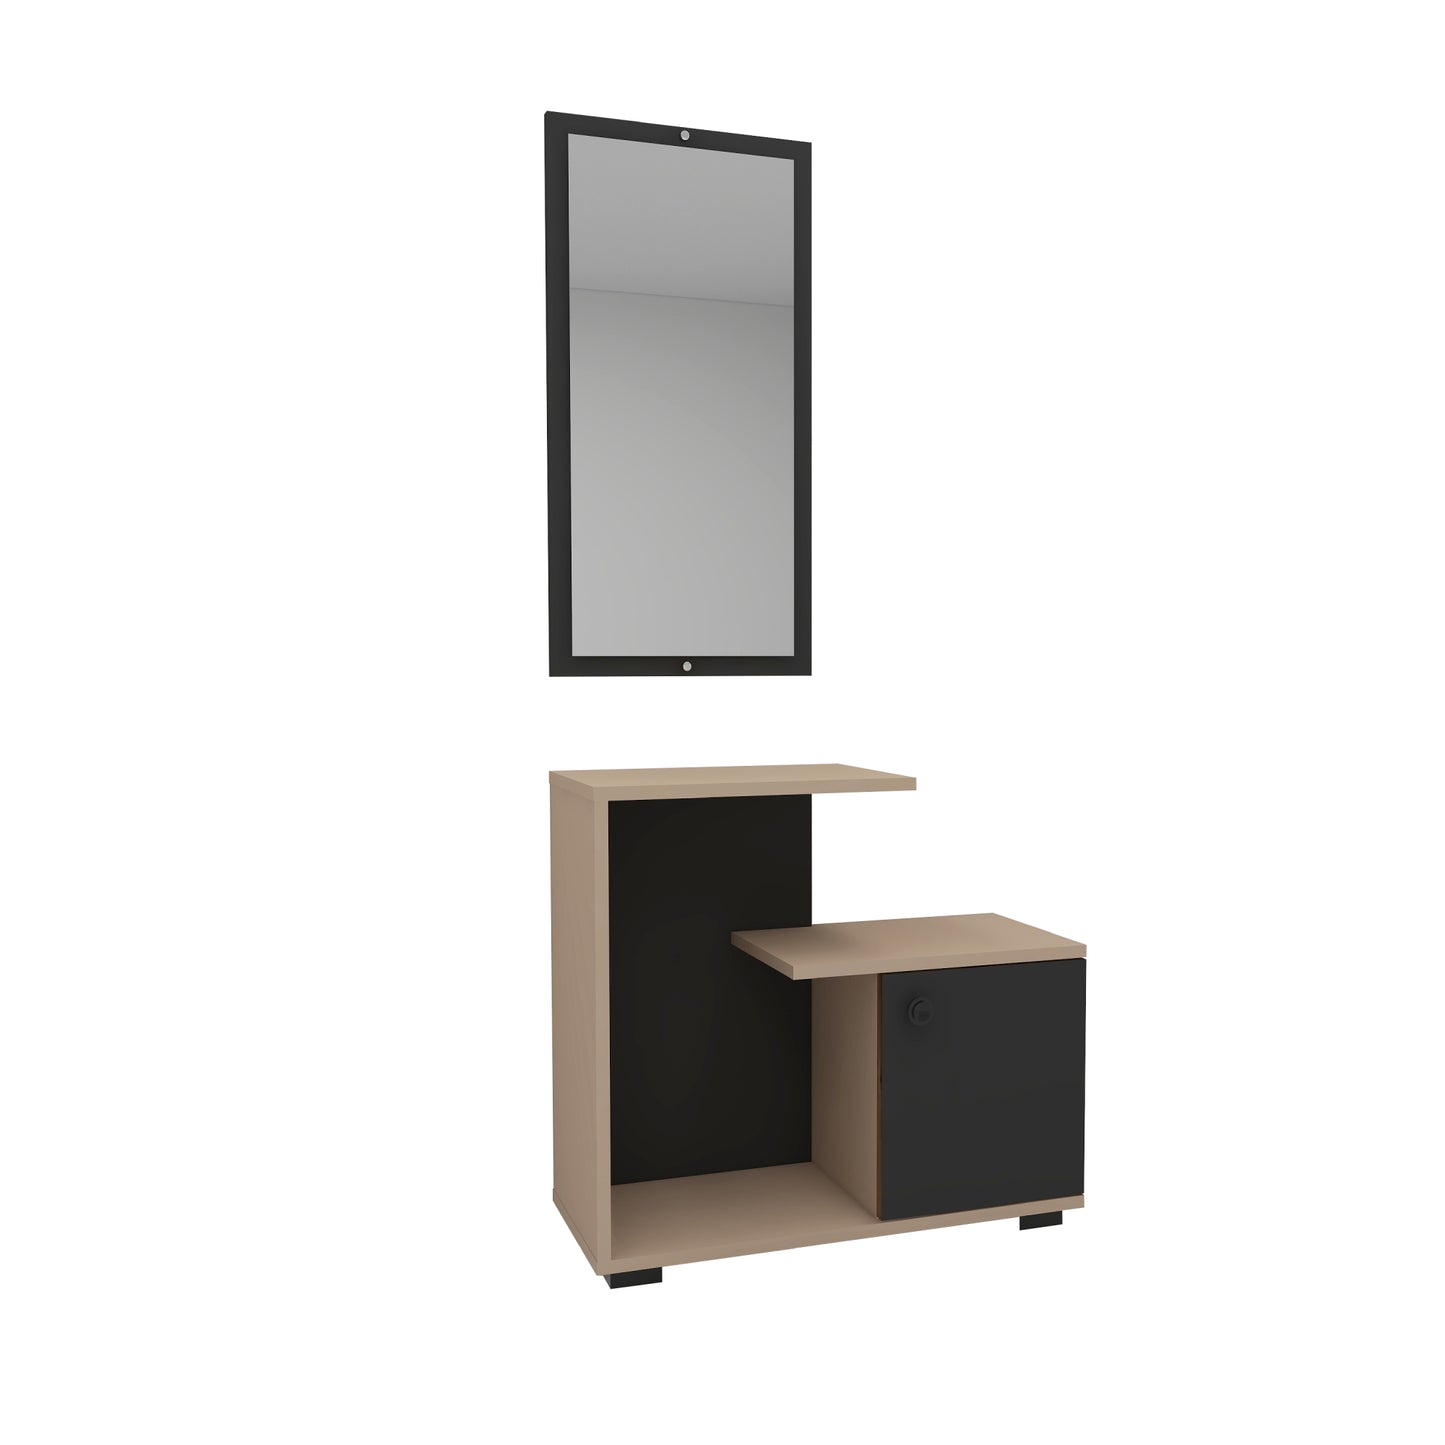 Ales Dresuar Console Table with Cabinet, Shelves and Mirror